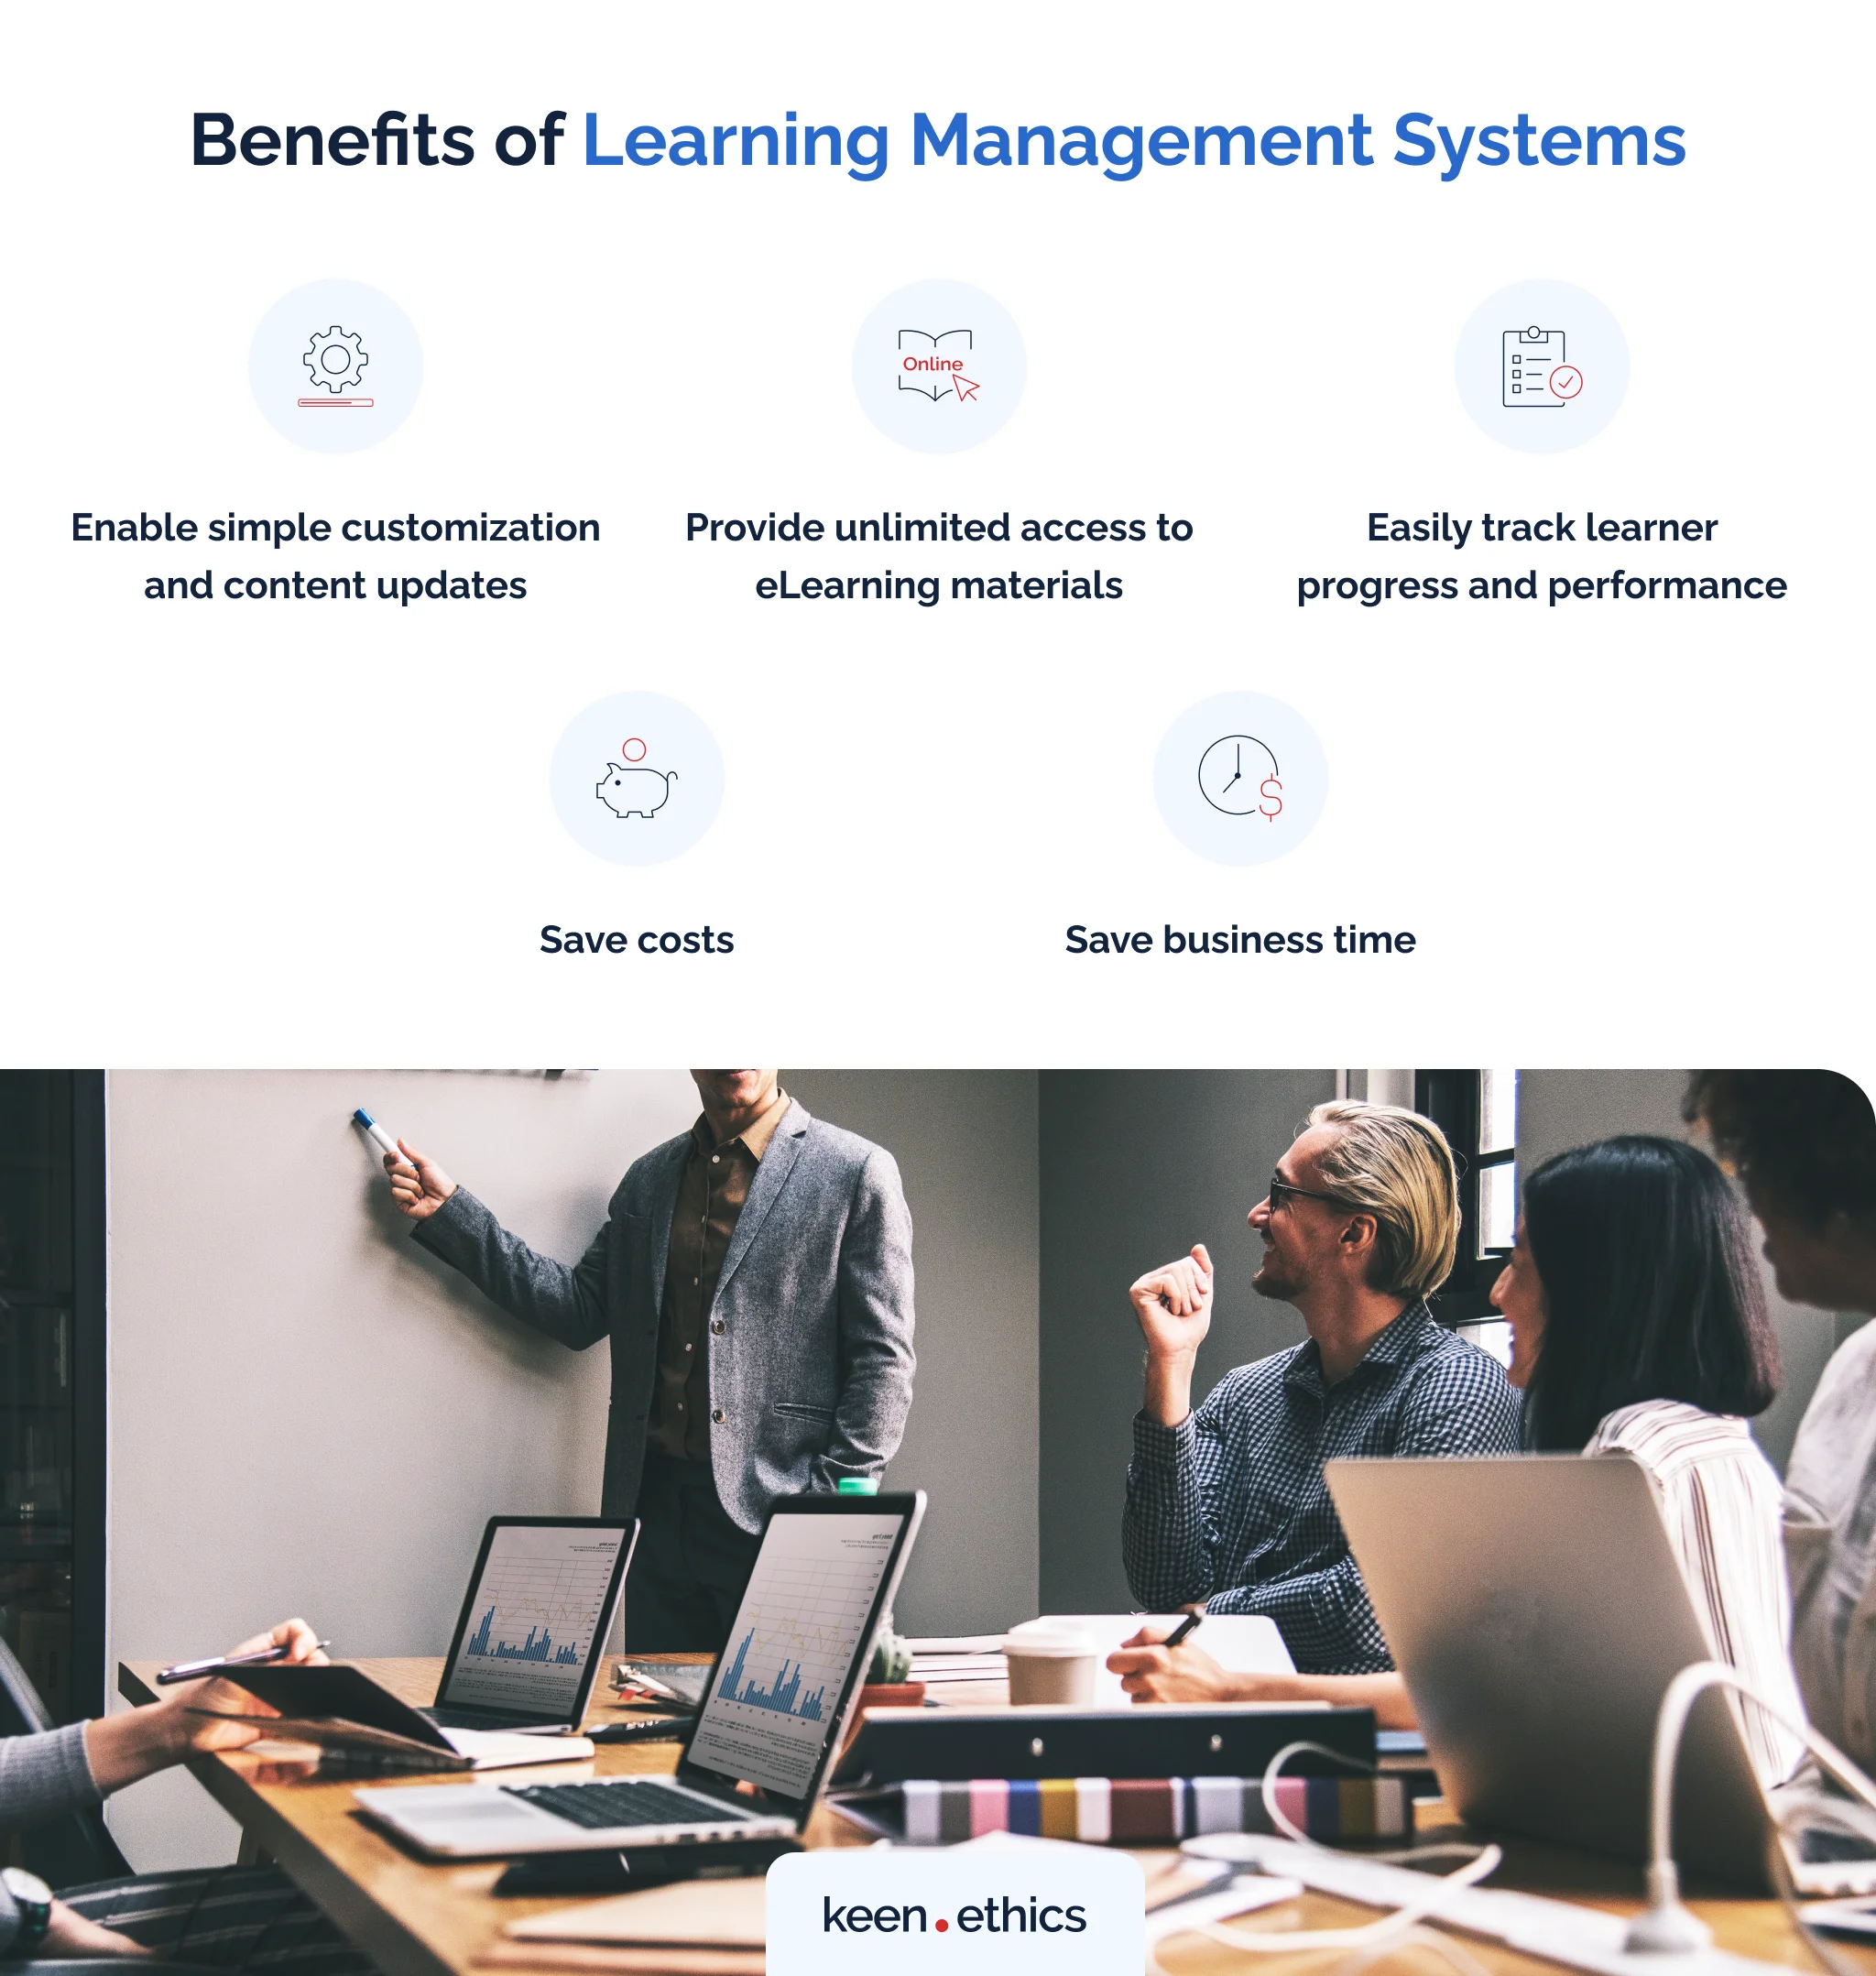 All benefits of learning management systems